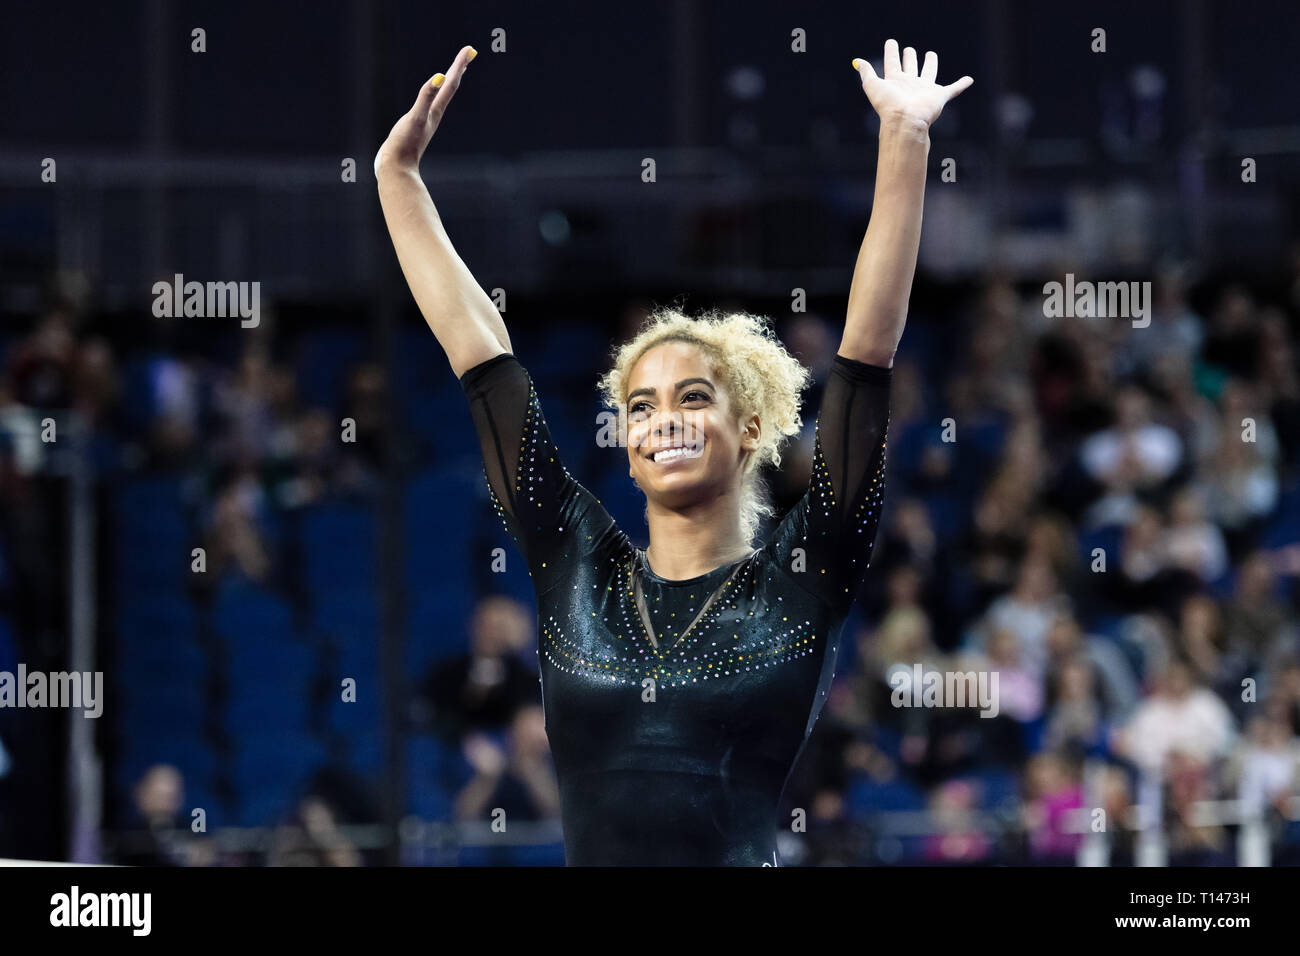 London, UK. 23rd March, 2019. Danusia Francis performs on the Beam during the Matchroom Multisport presents the 2019 Superstars of Gymnastics at The O2 Arena on Saturday, 23 March 2019. LONDON ENGLAND. Credit: Taka G Wu/Alamy News Stock Photo